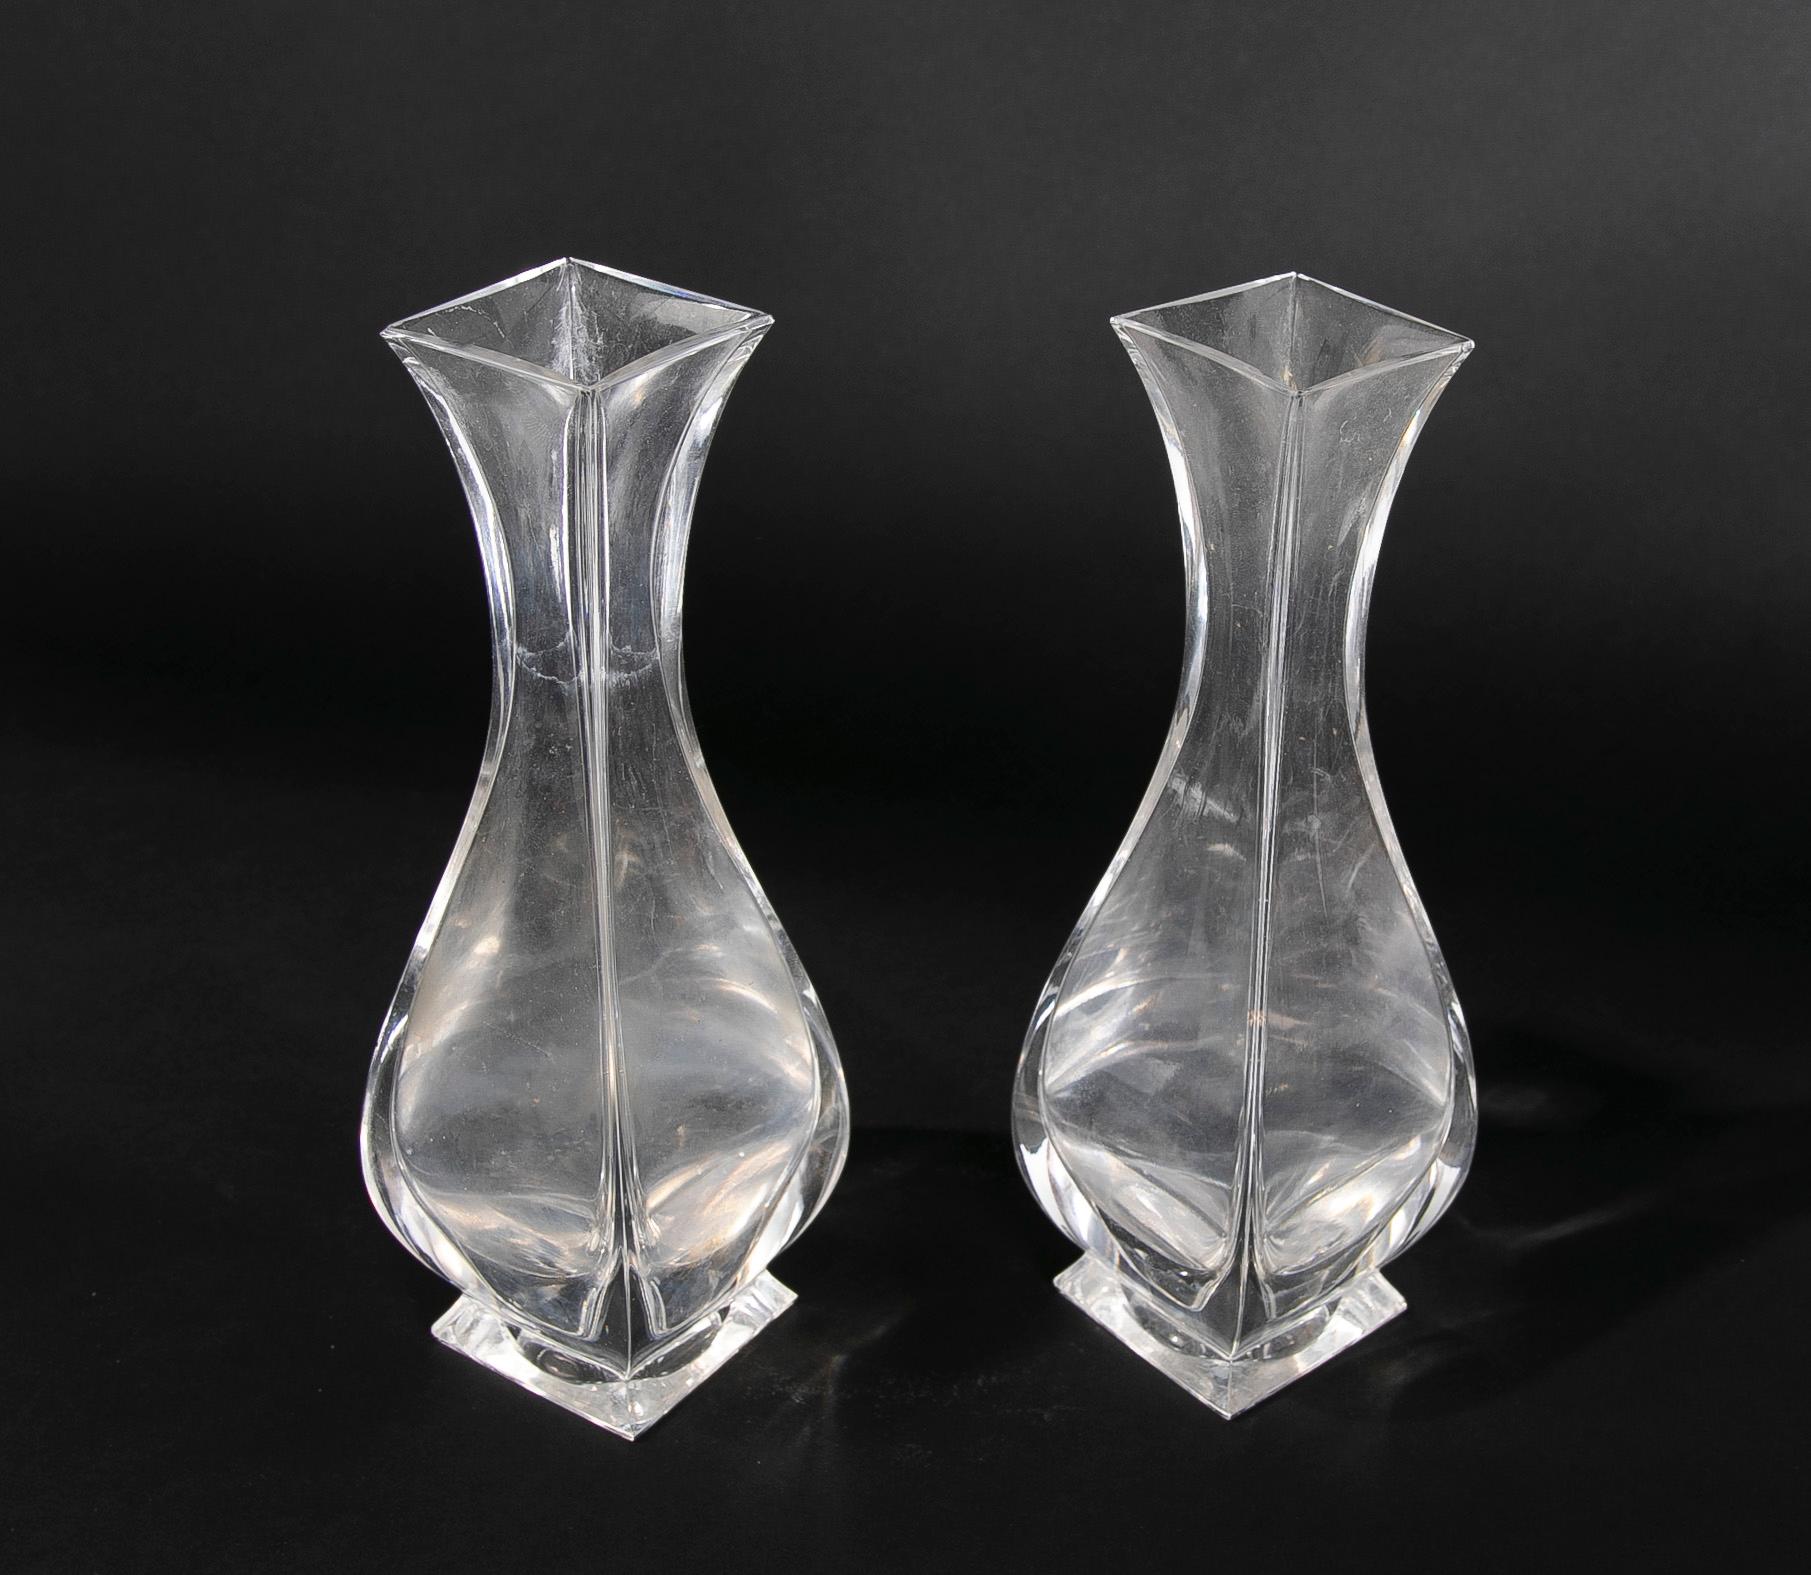 Pair of Glass Vases with a Curved Shape and Square Mouth.